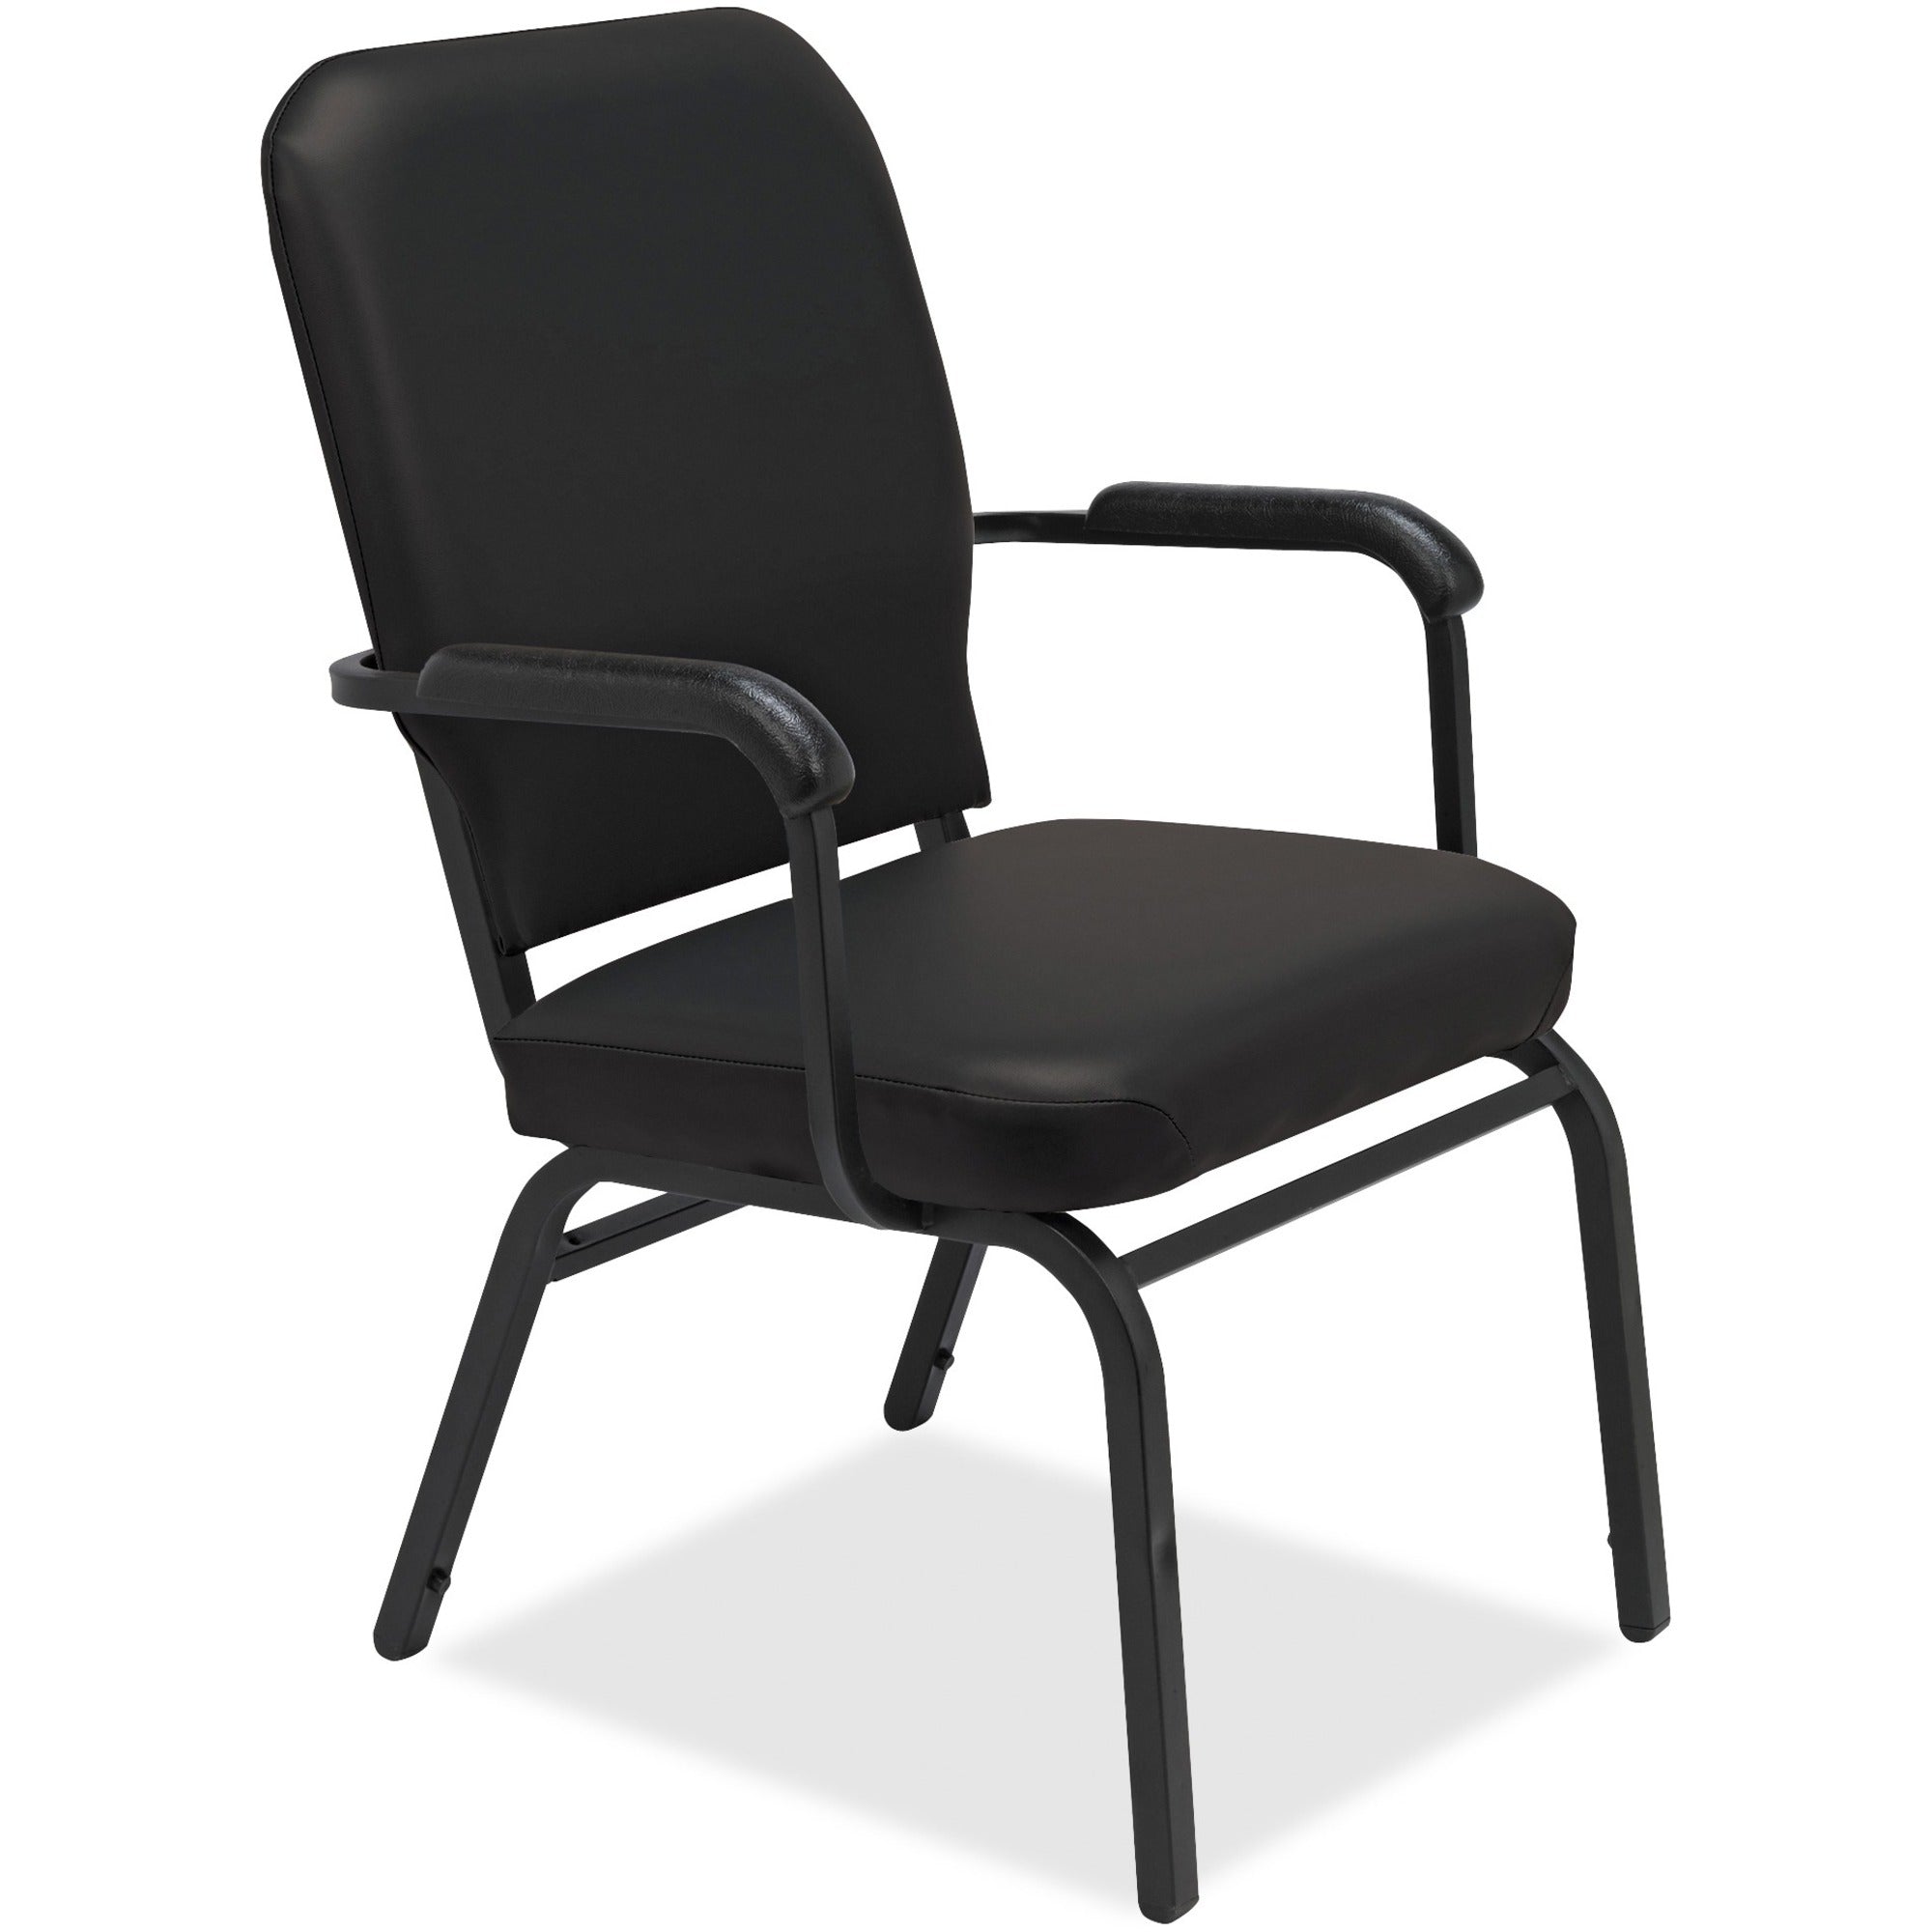 Lorell Oversize Stack Chairs with Arms - Black Vinyl Seat - Black Vinyl Back - Steel Frame - Four-legged Base - 2 / Carton - 